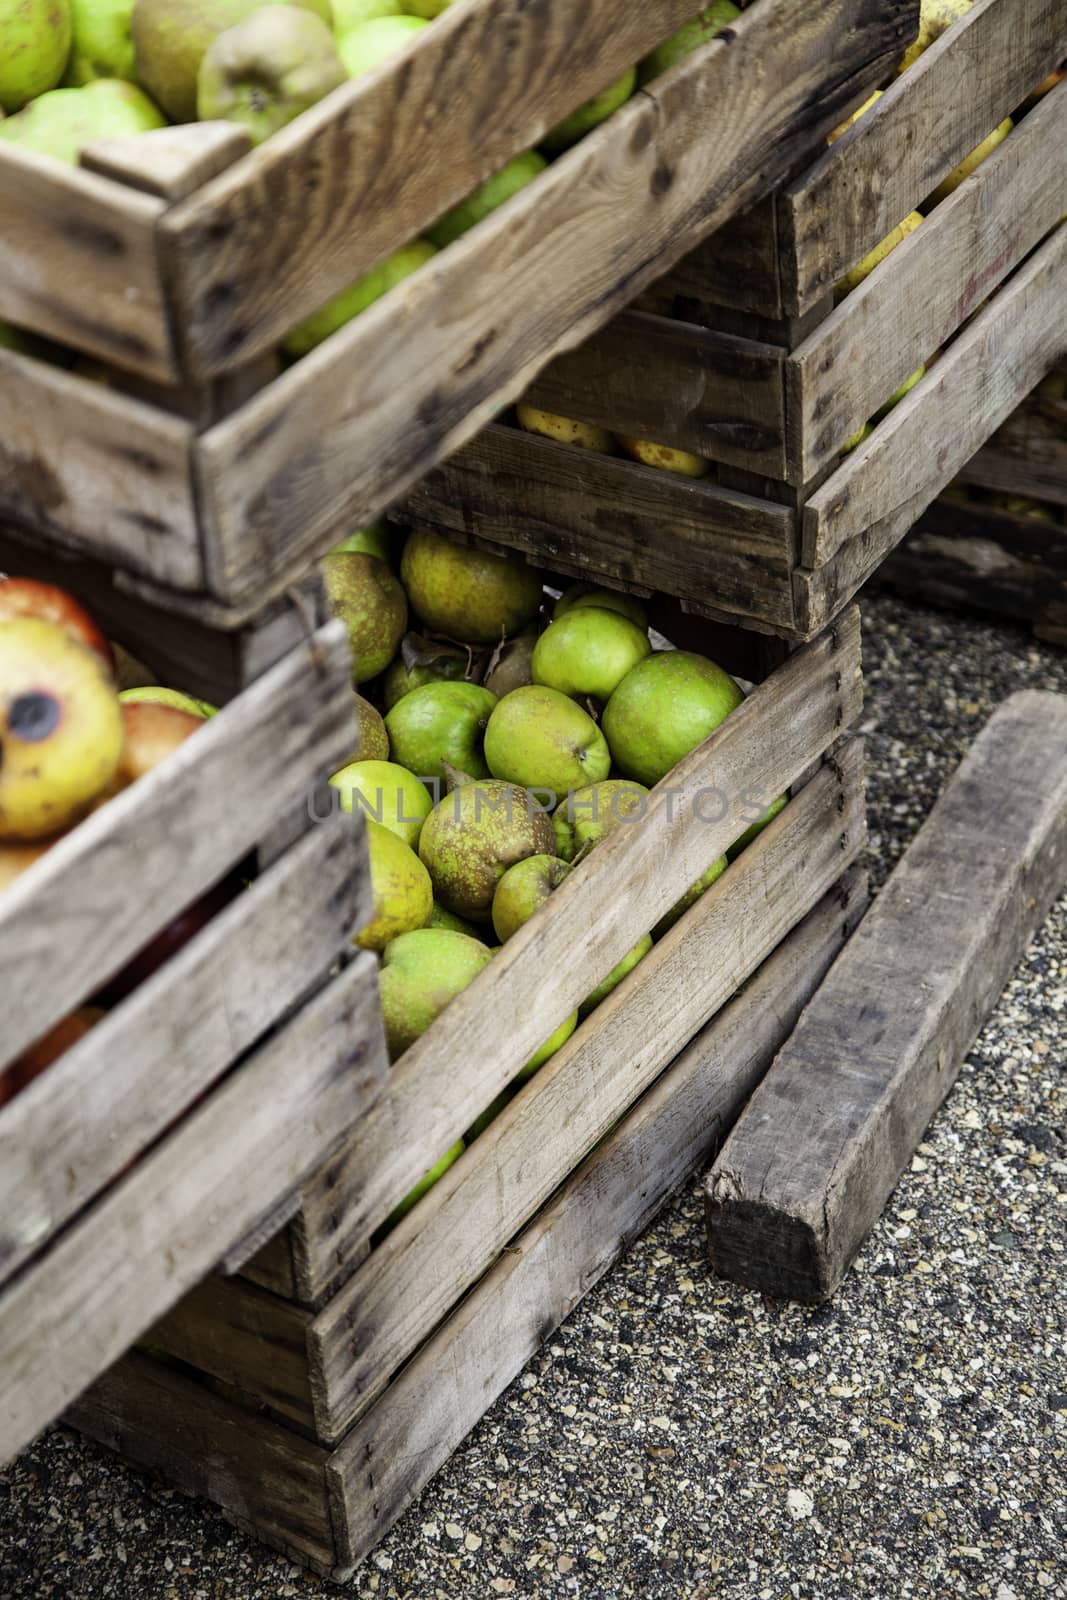 Apples in wooden boxes by esebene